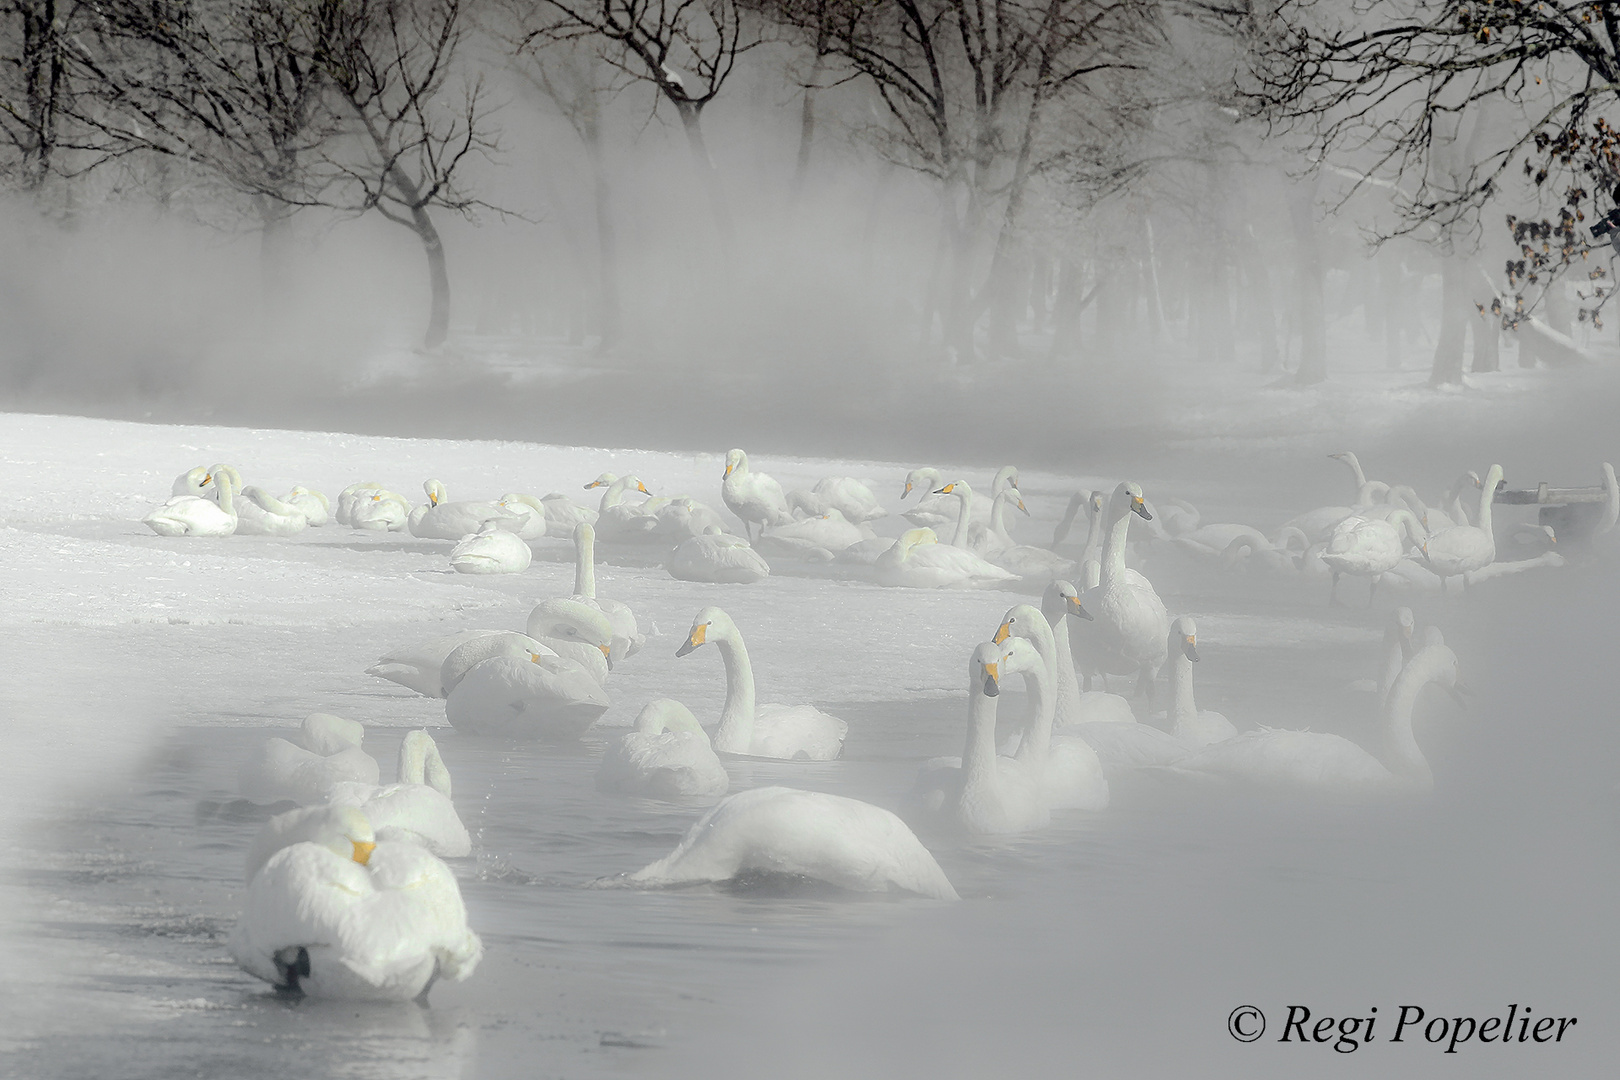 Whooper swans at the hot springs